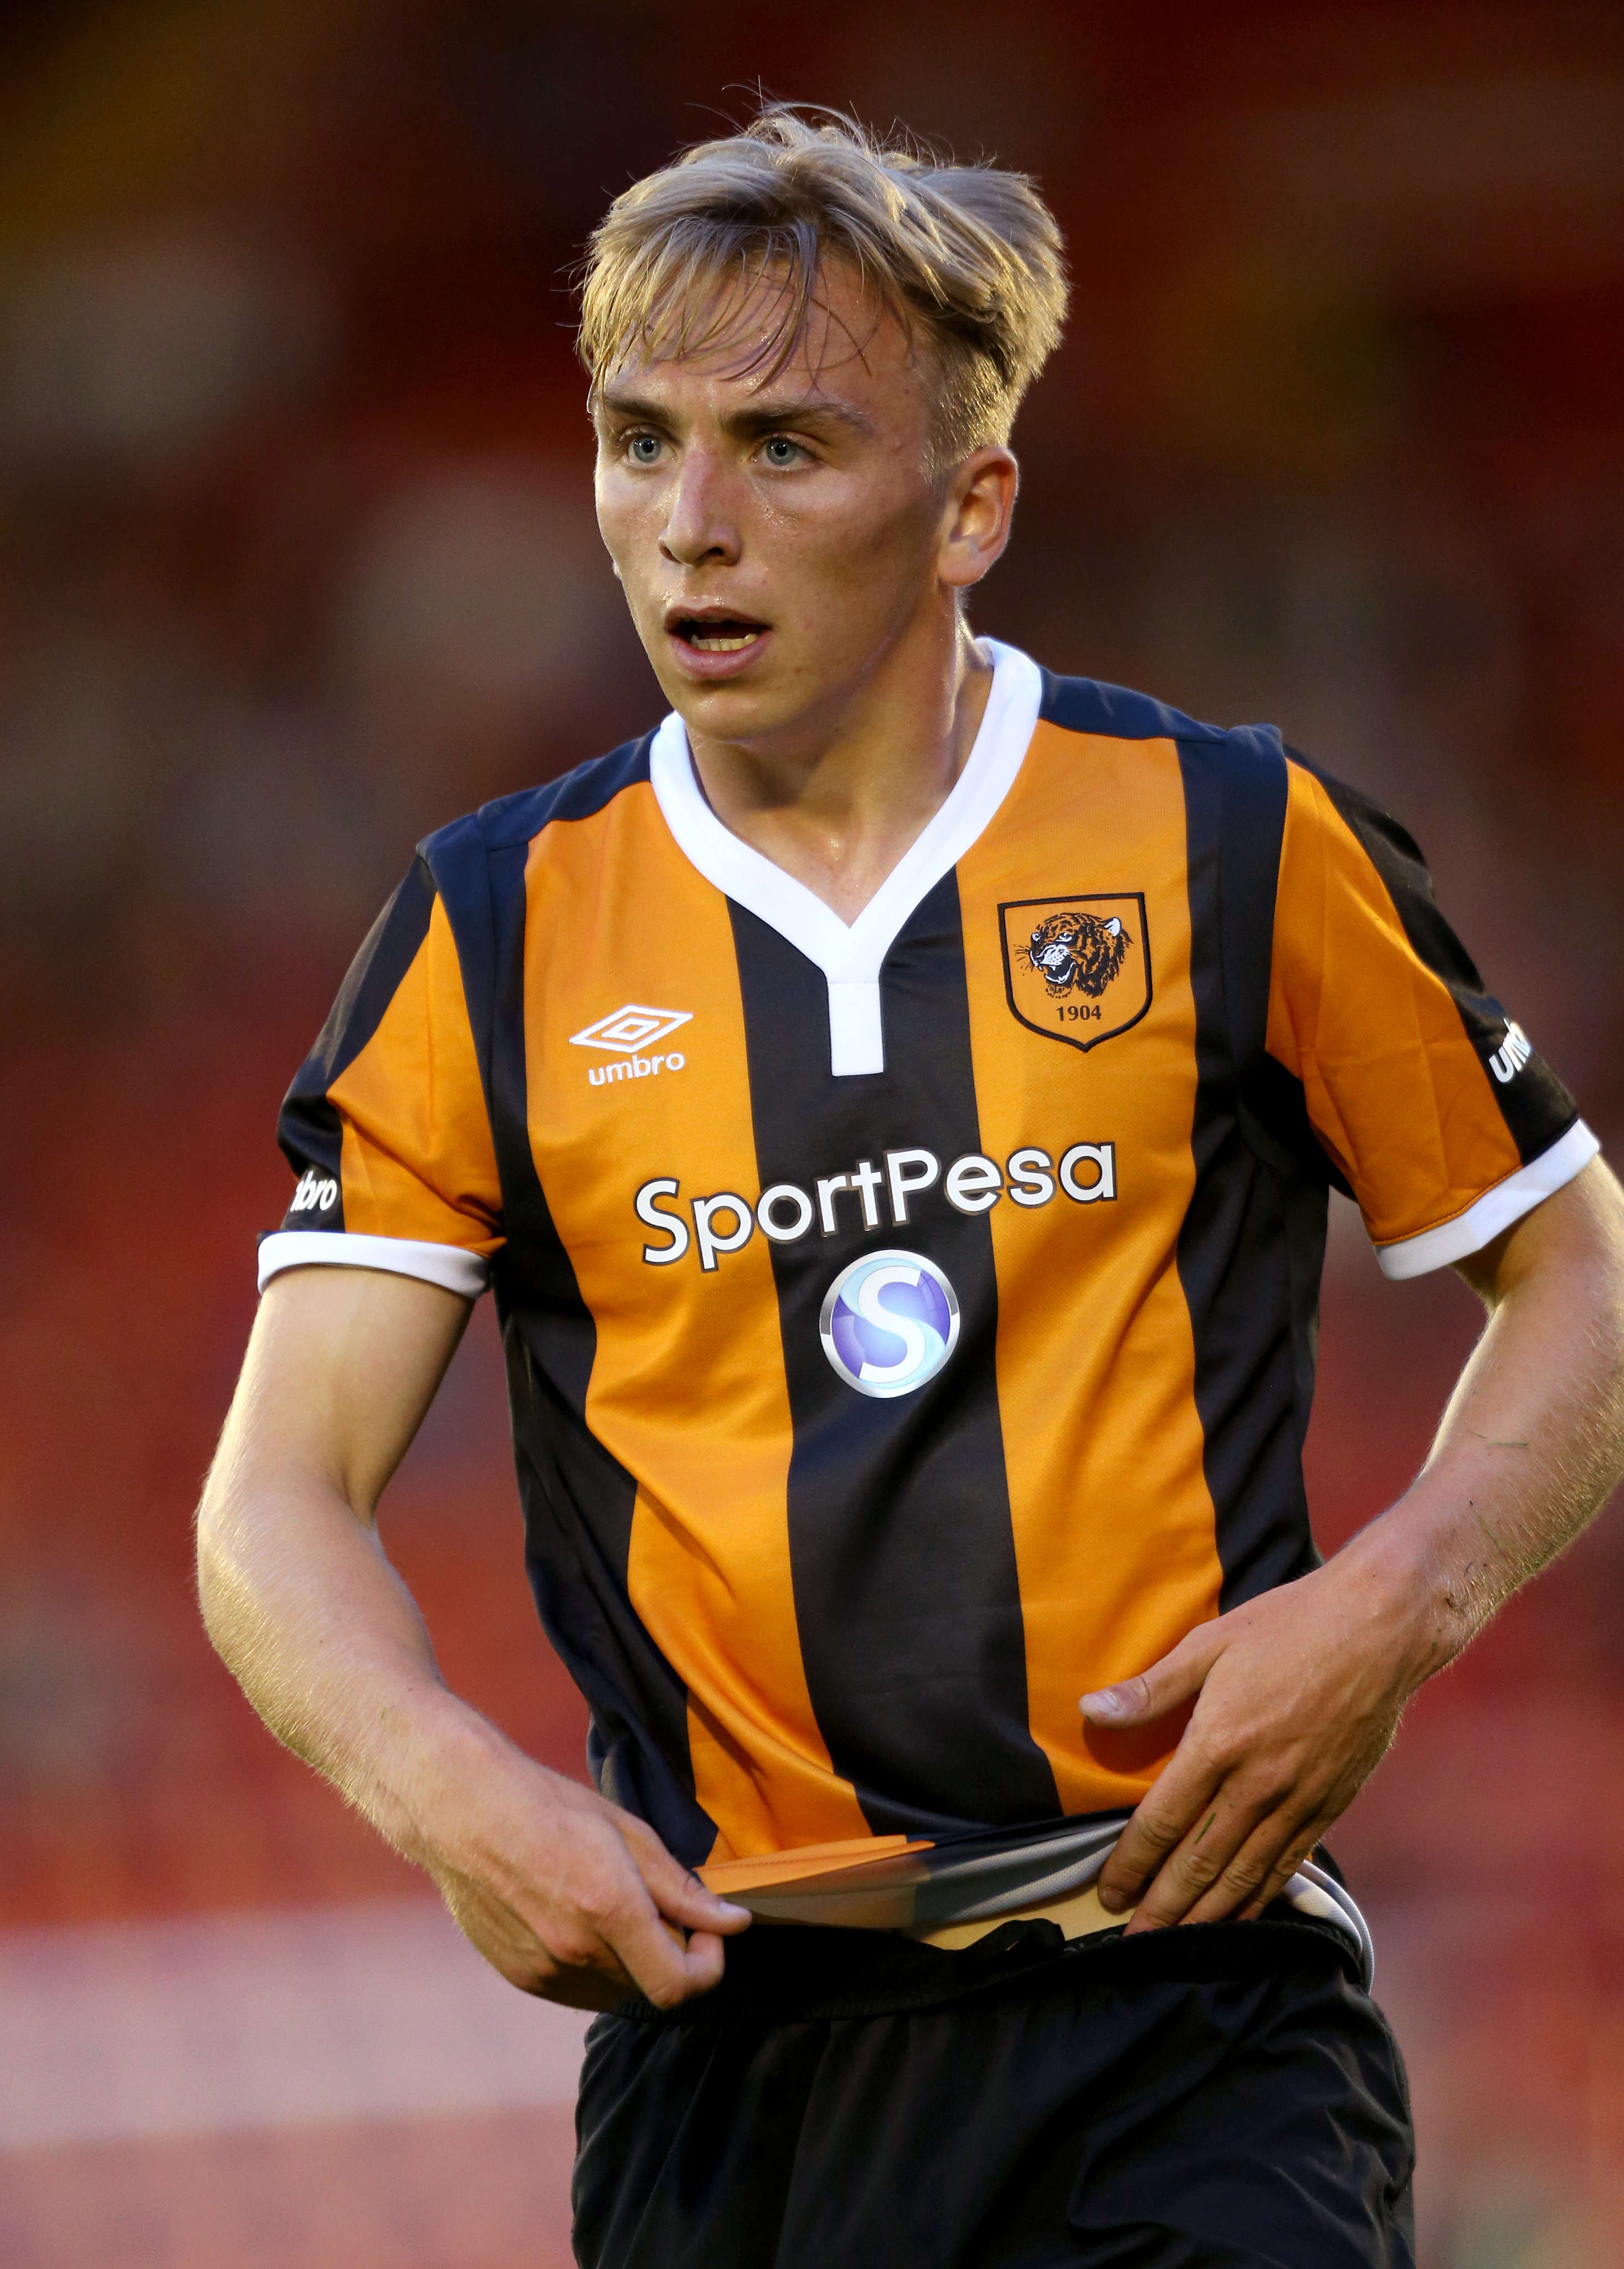 Bowen first caught the eye while playing for Hull